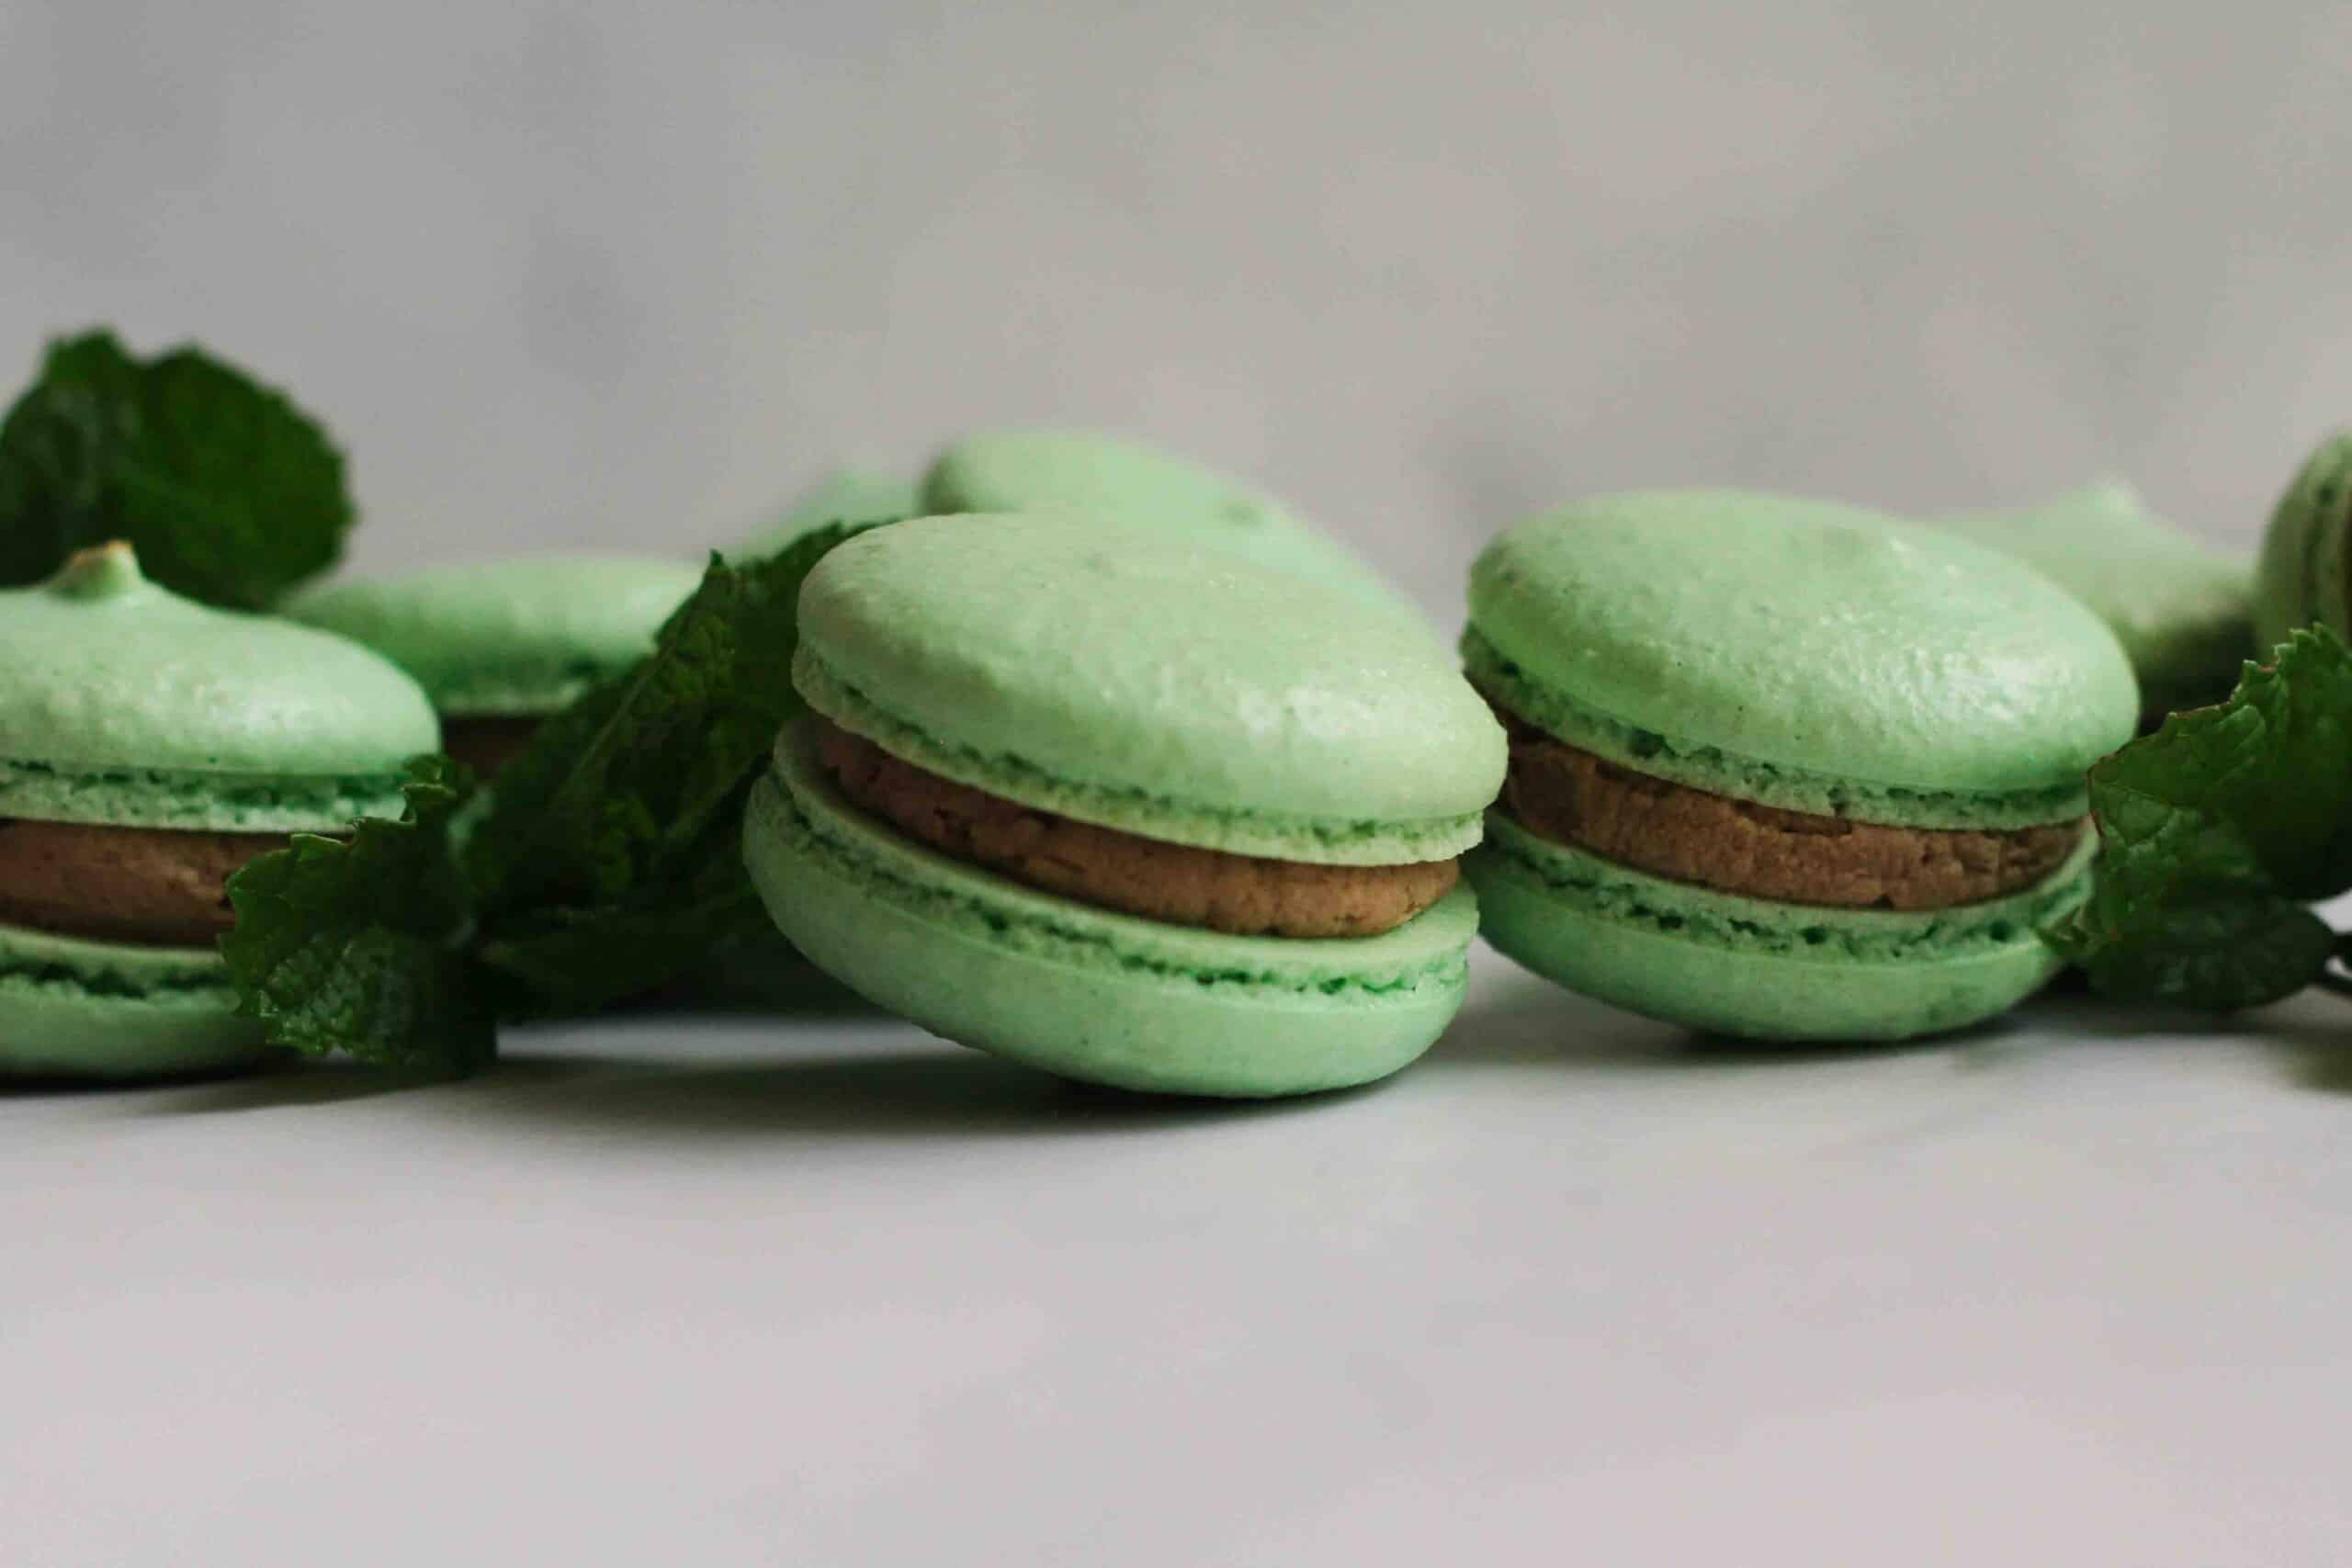 Chocolate Mint Macarons next to each other with Mint Leaves